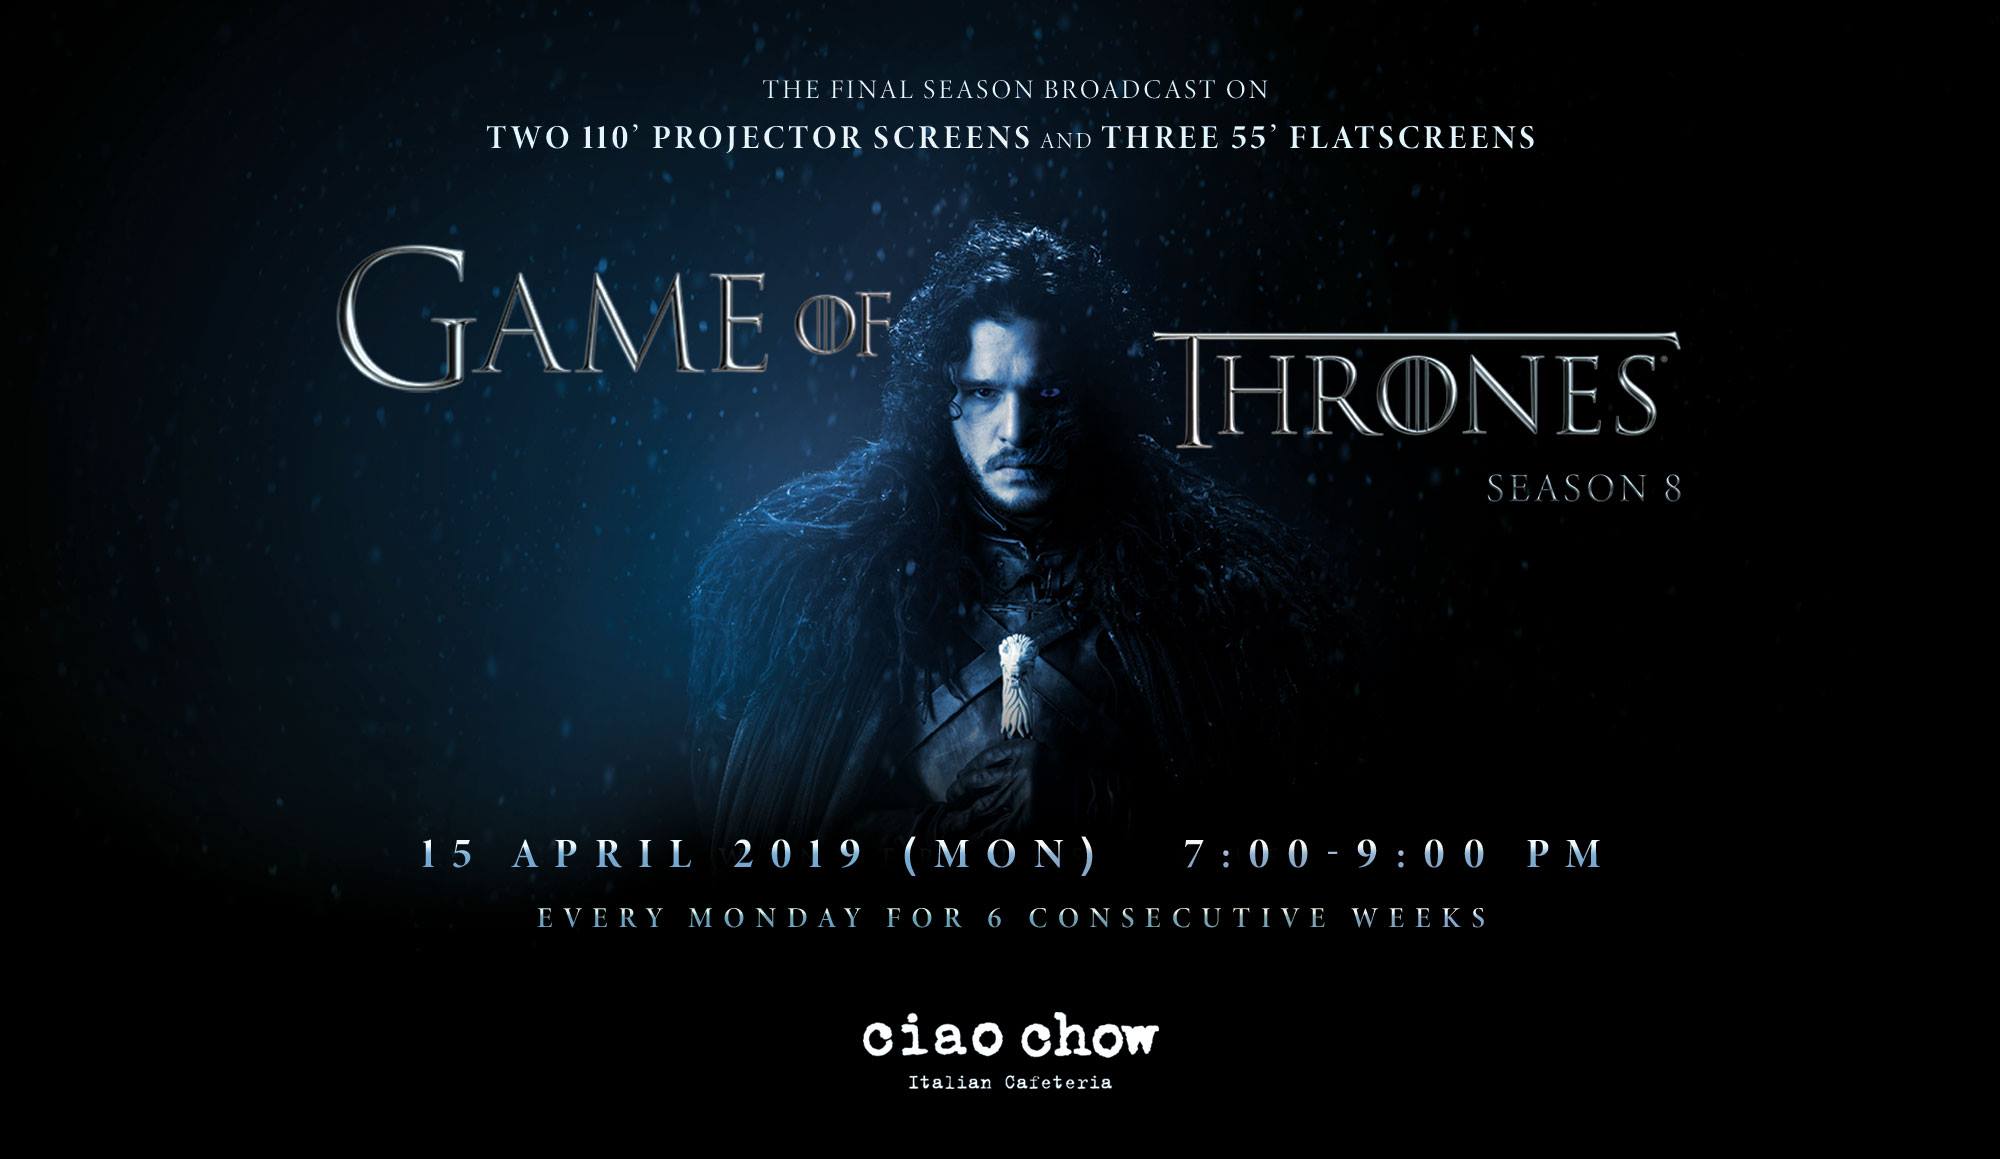 【Game of Thrones The Final Season Broadcast & Giveaway】 Who wants a free pair of Game of Thrones x Adidas Ultra Boost which has already sold-out?! 🎁We got our hands on this pair, and we're giving them away in a lucky draw when we show the first episode on 15 Apr (7pm - 9pm).... If you want a chance to get your hands on them here's what you need to do: 1. Follow both our Facebook and Instagram Pages (ciaochow.hk)